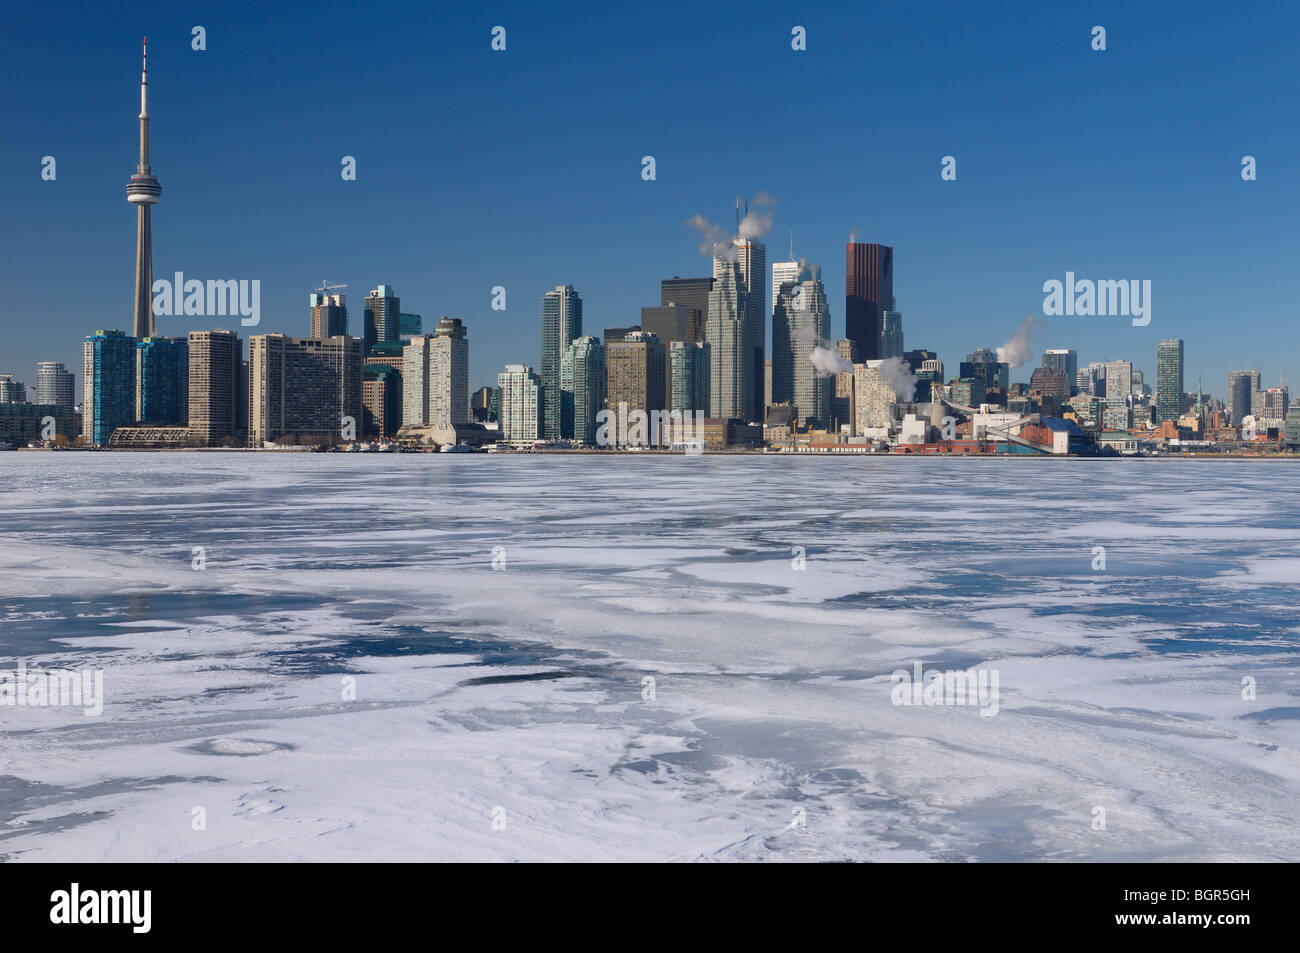 Frozen Lake Ontario with ice and snow and Toronto city skyline on a clear cold day with blue sky Stock Photo